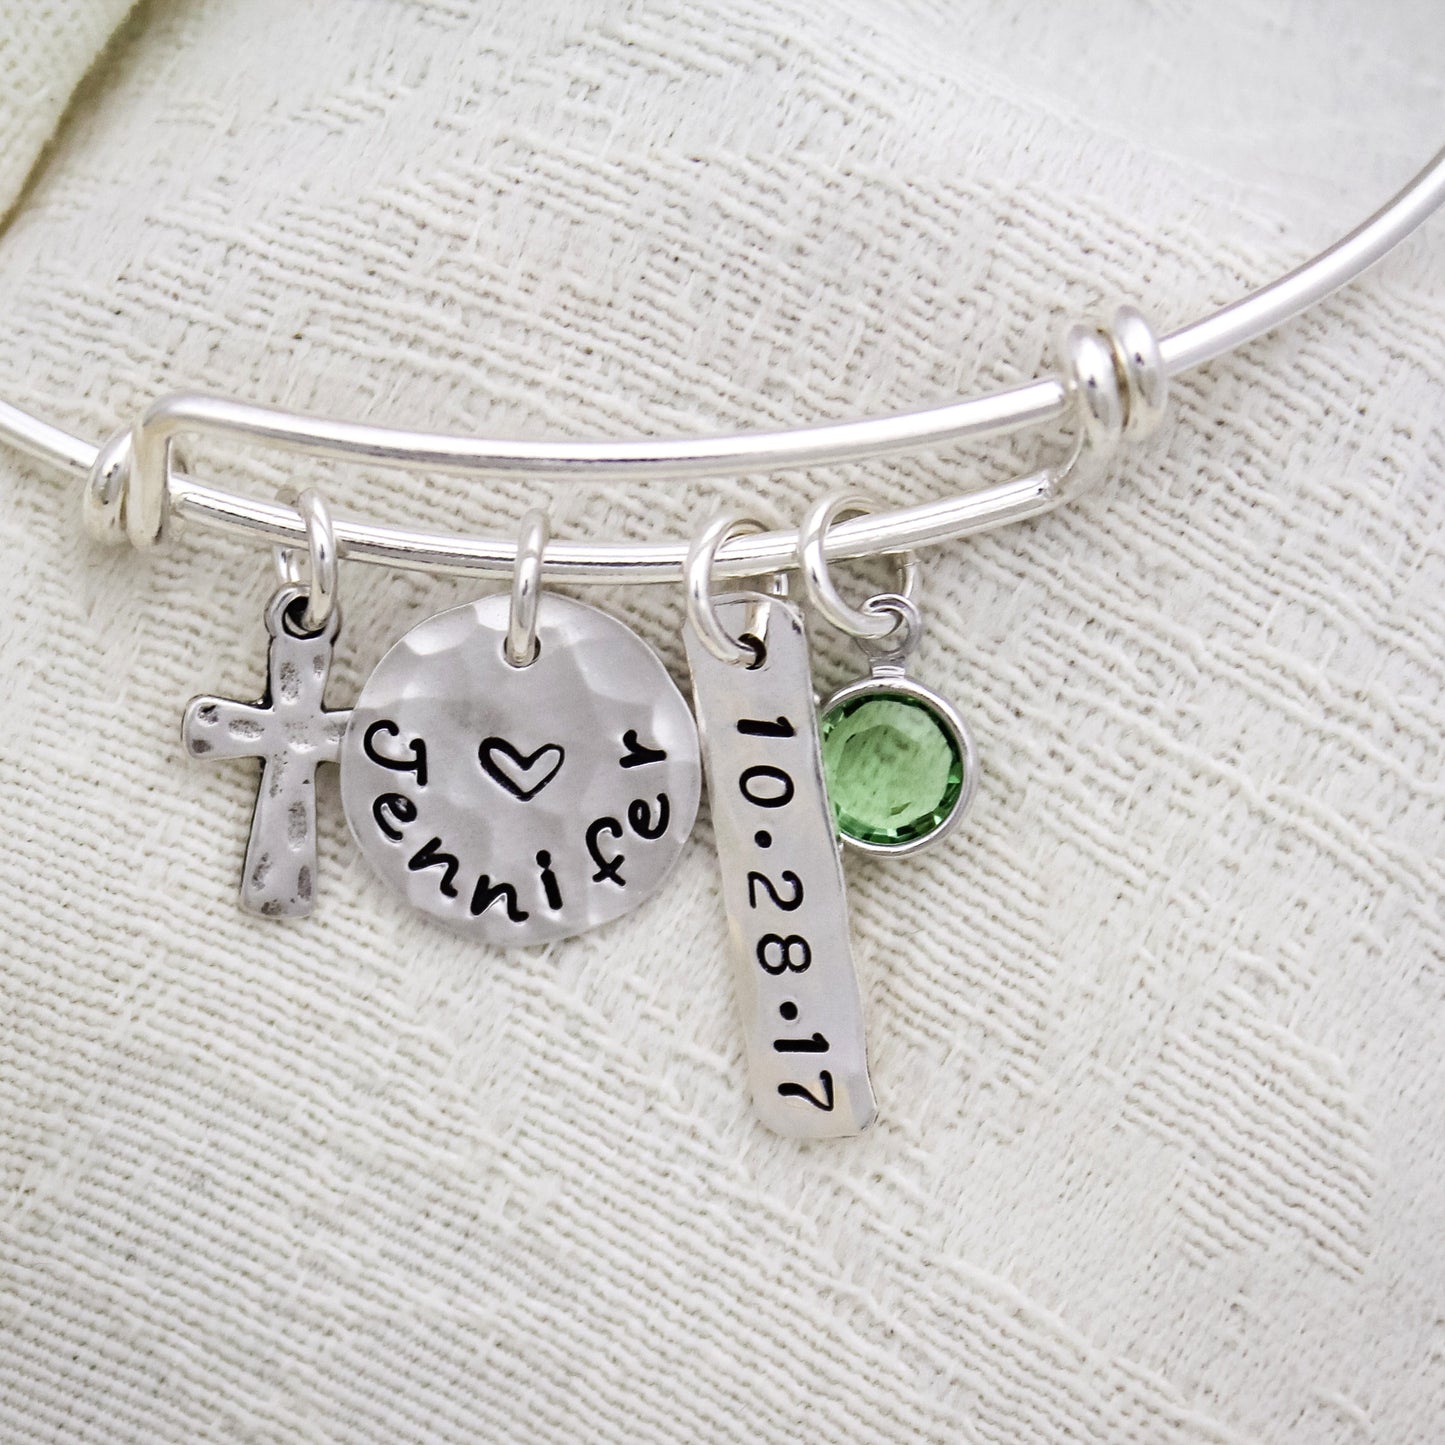 Personalized Confirmation Bangle, Communion Bracelet, Confirmation Gift, with Date Cross Adjustable Bangle Hand Stamped Sterling Silver